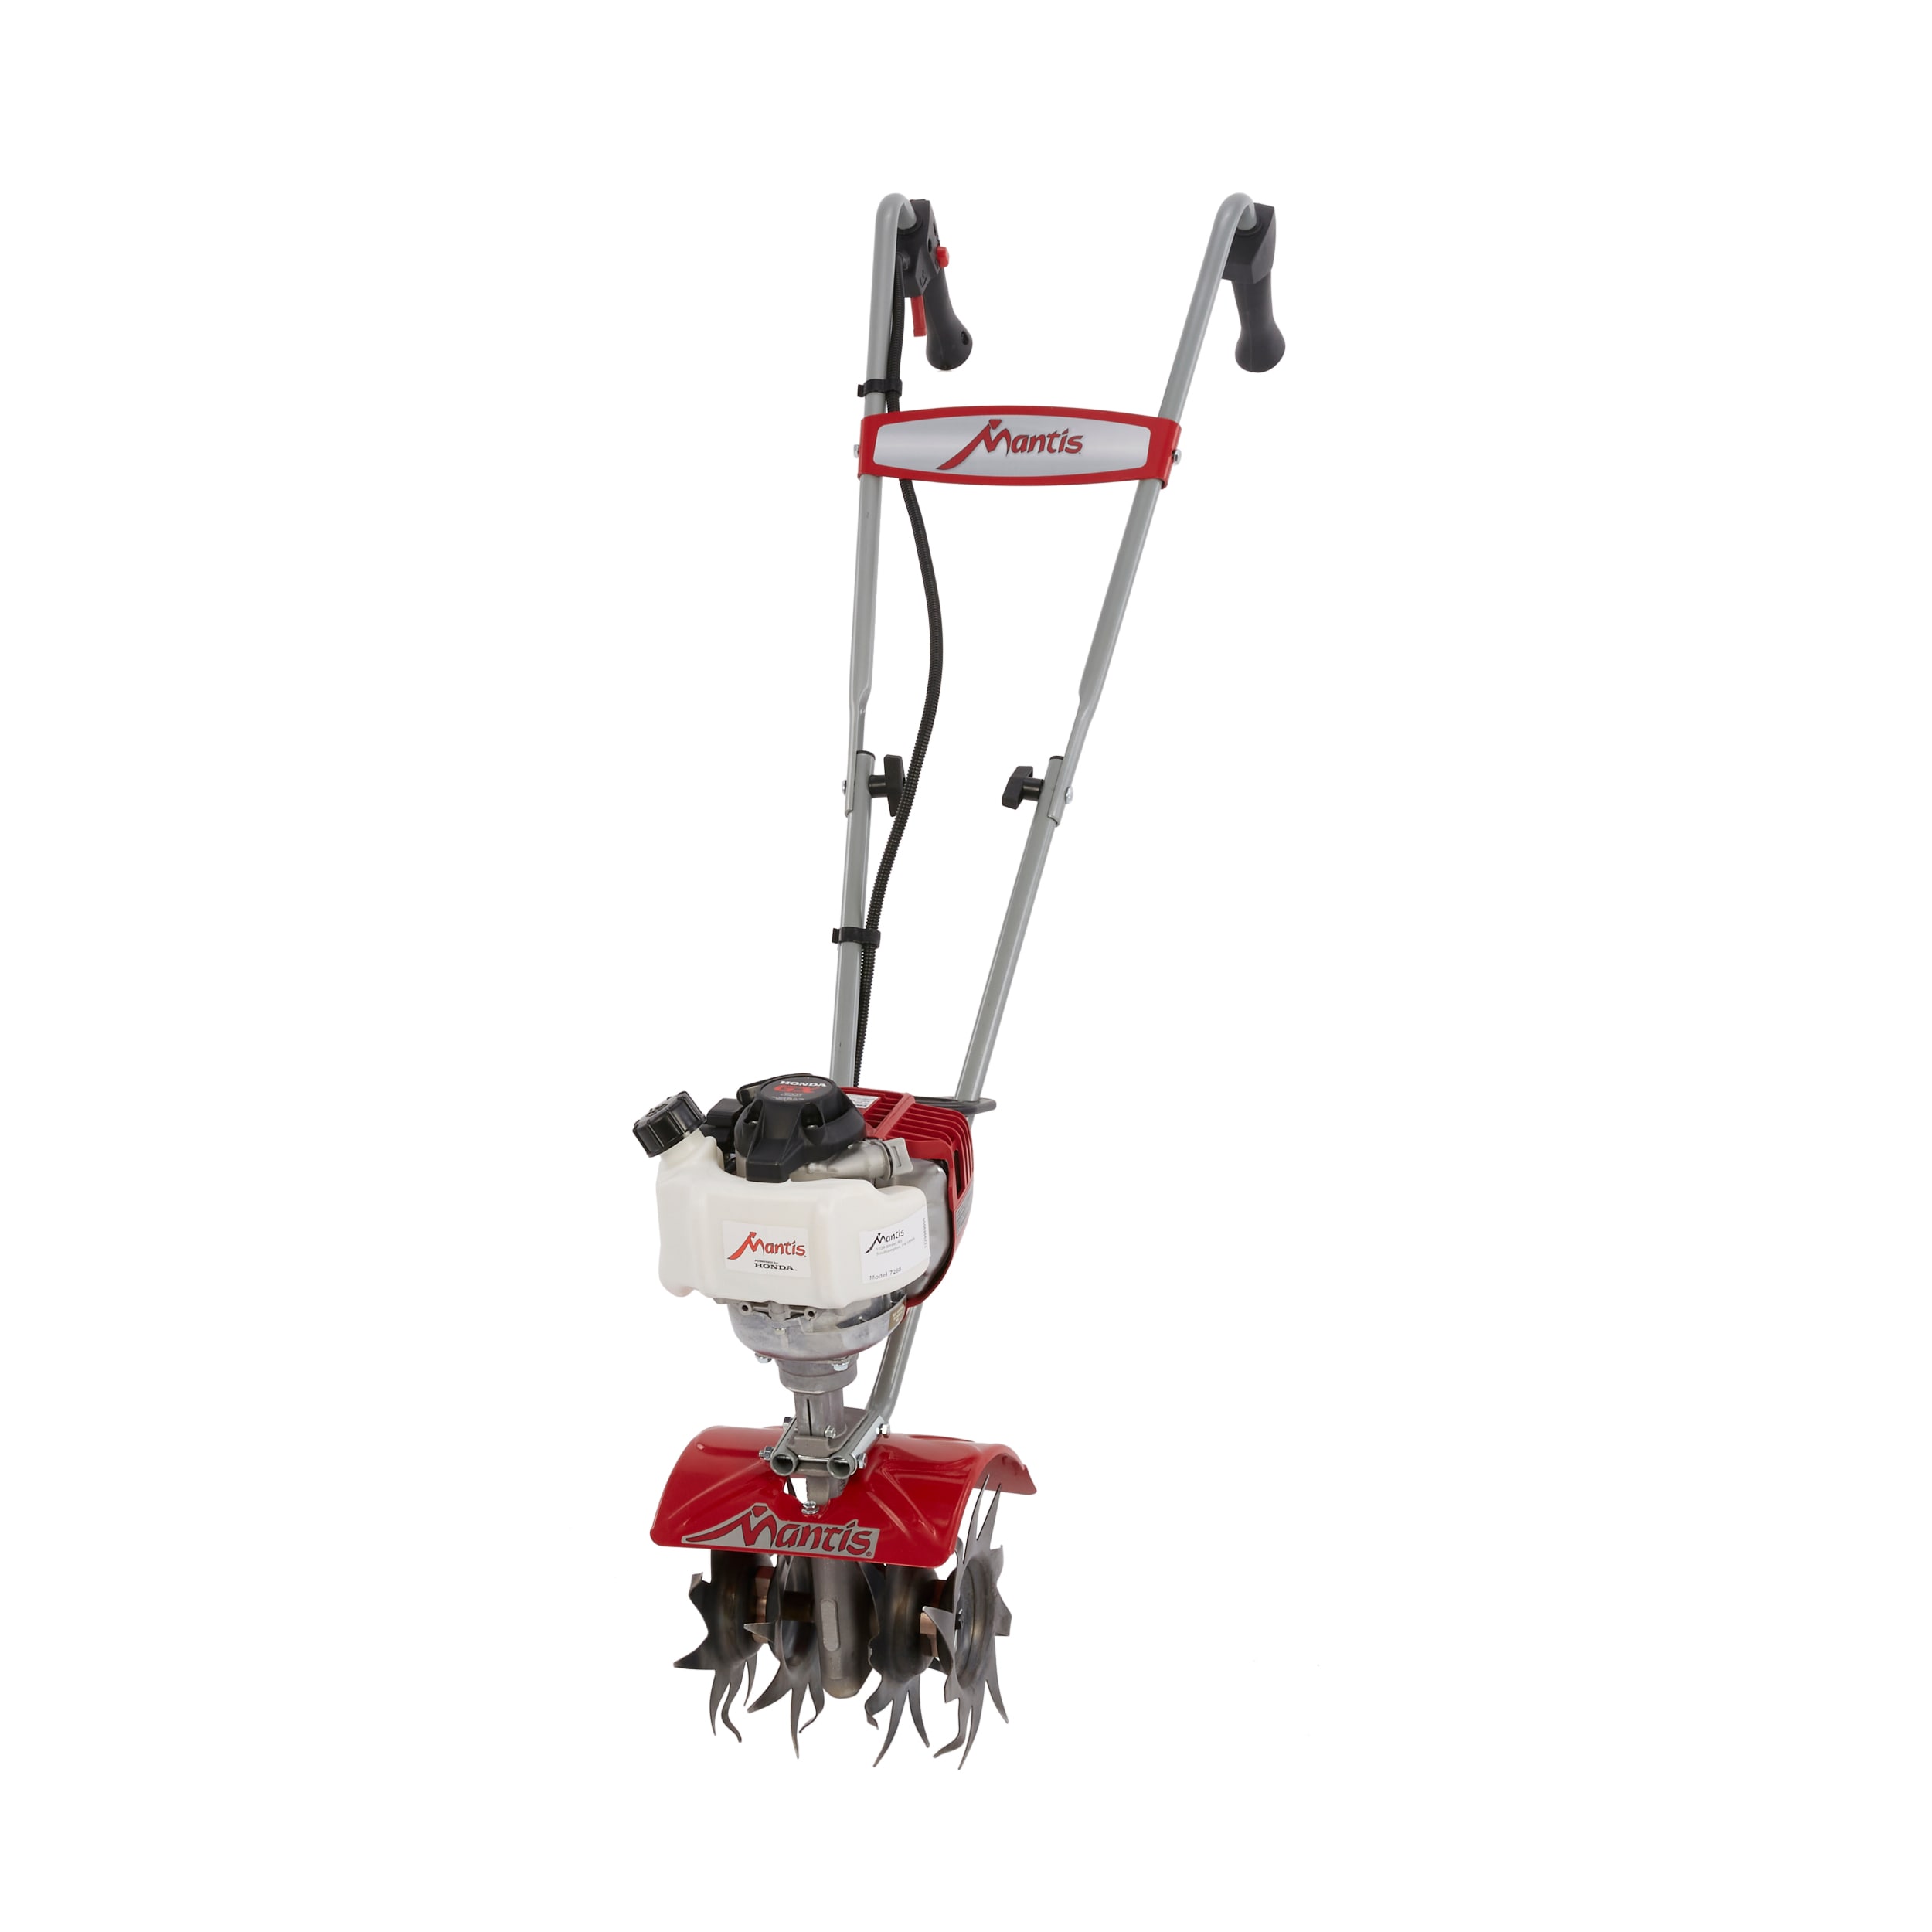 Image of Rotary cultivator lowes